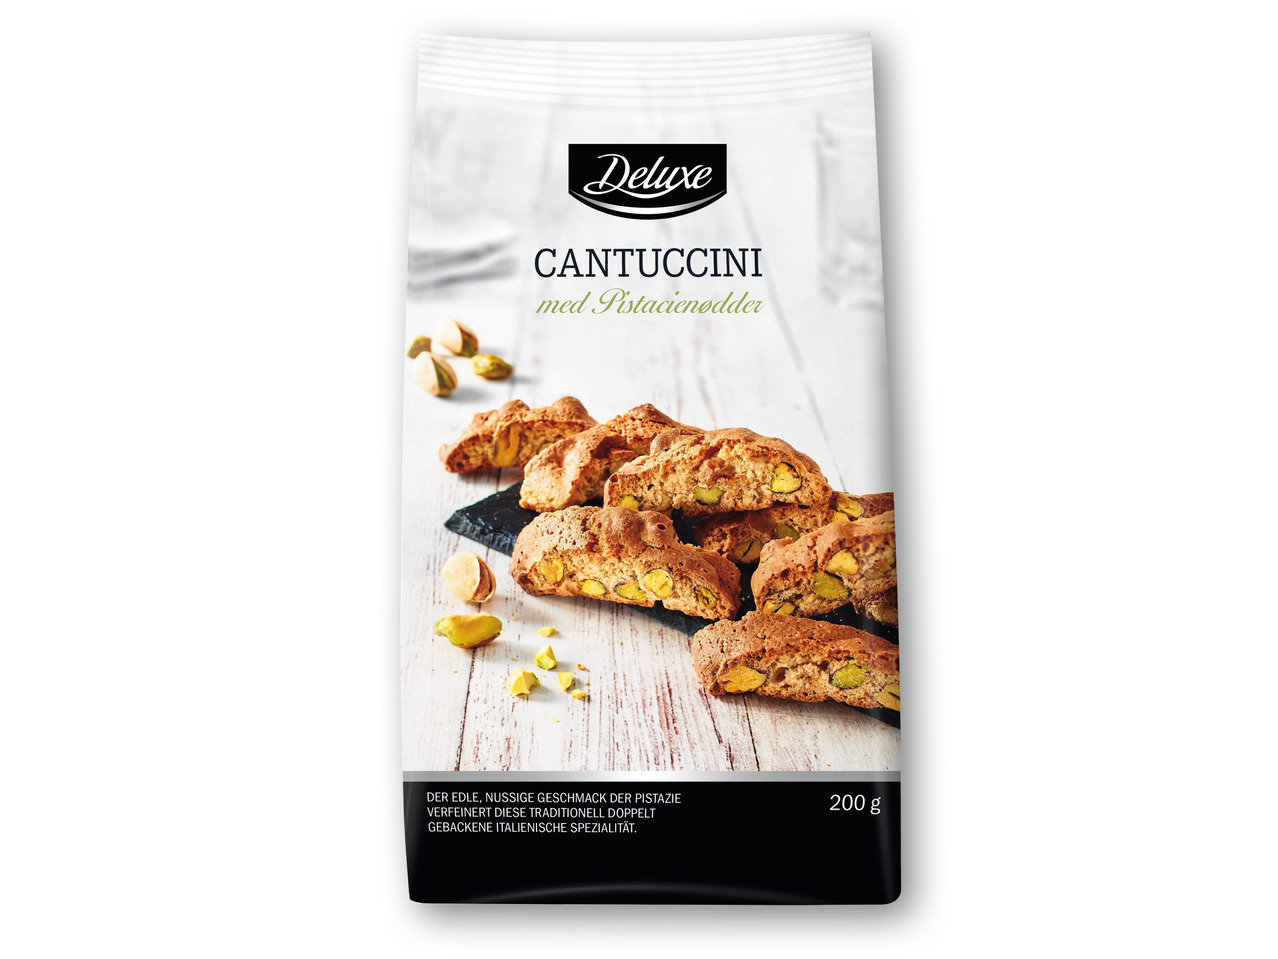 DELUXE Cantuccini